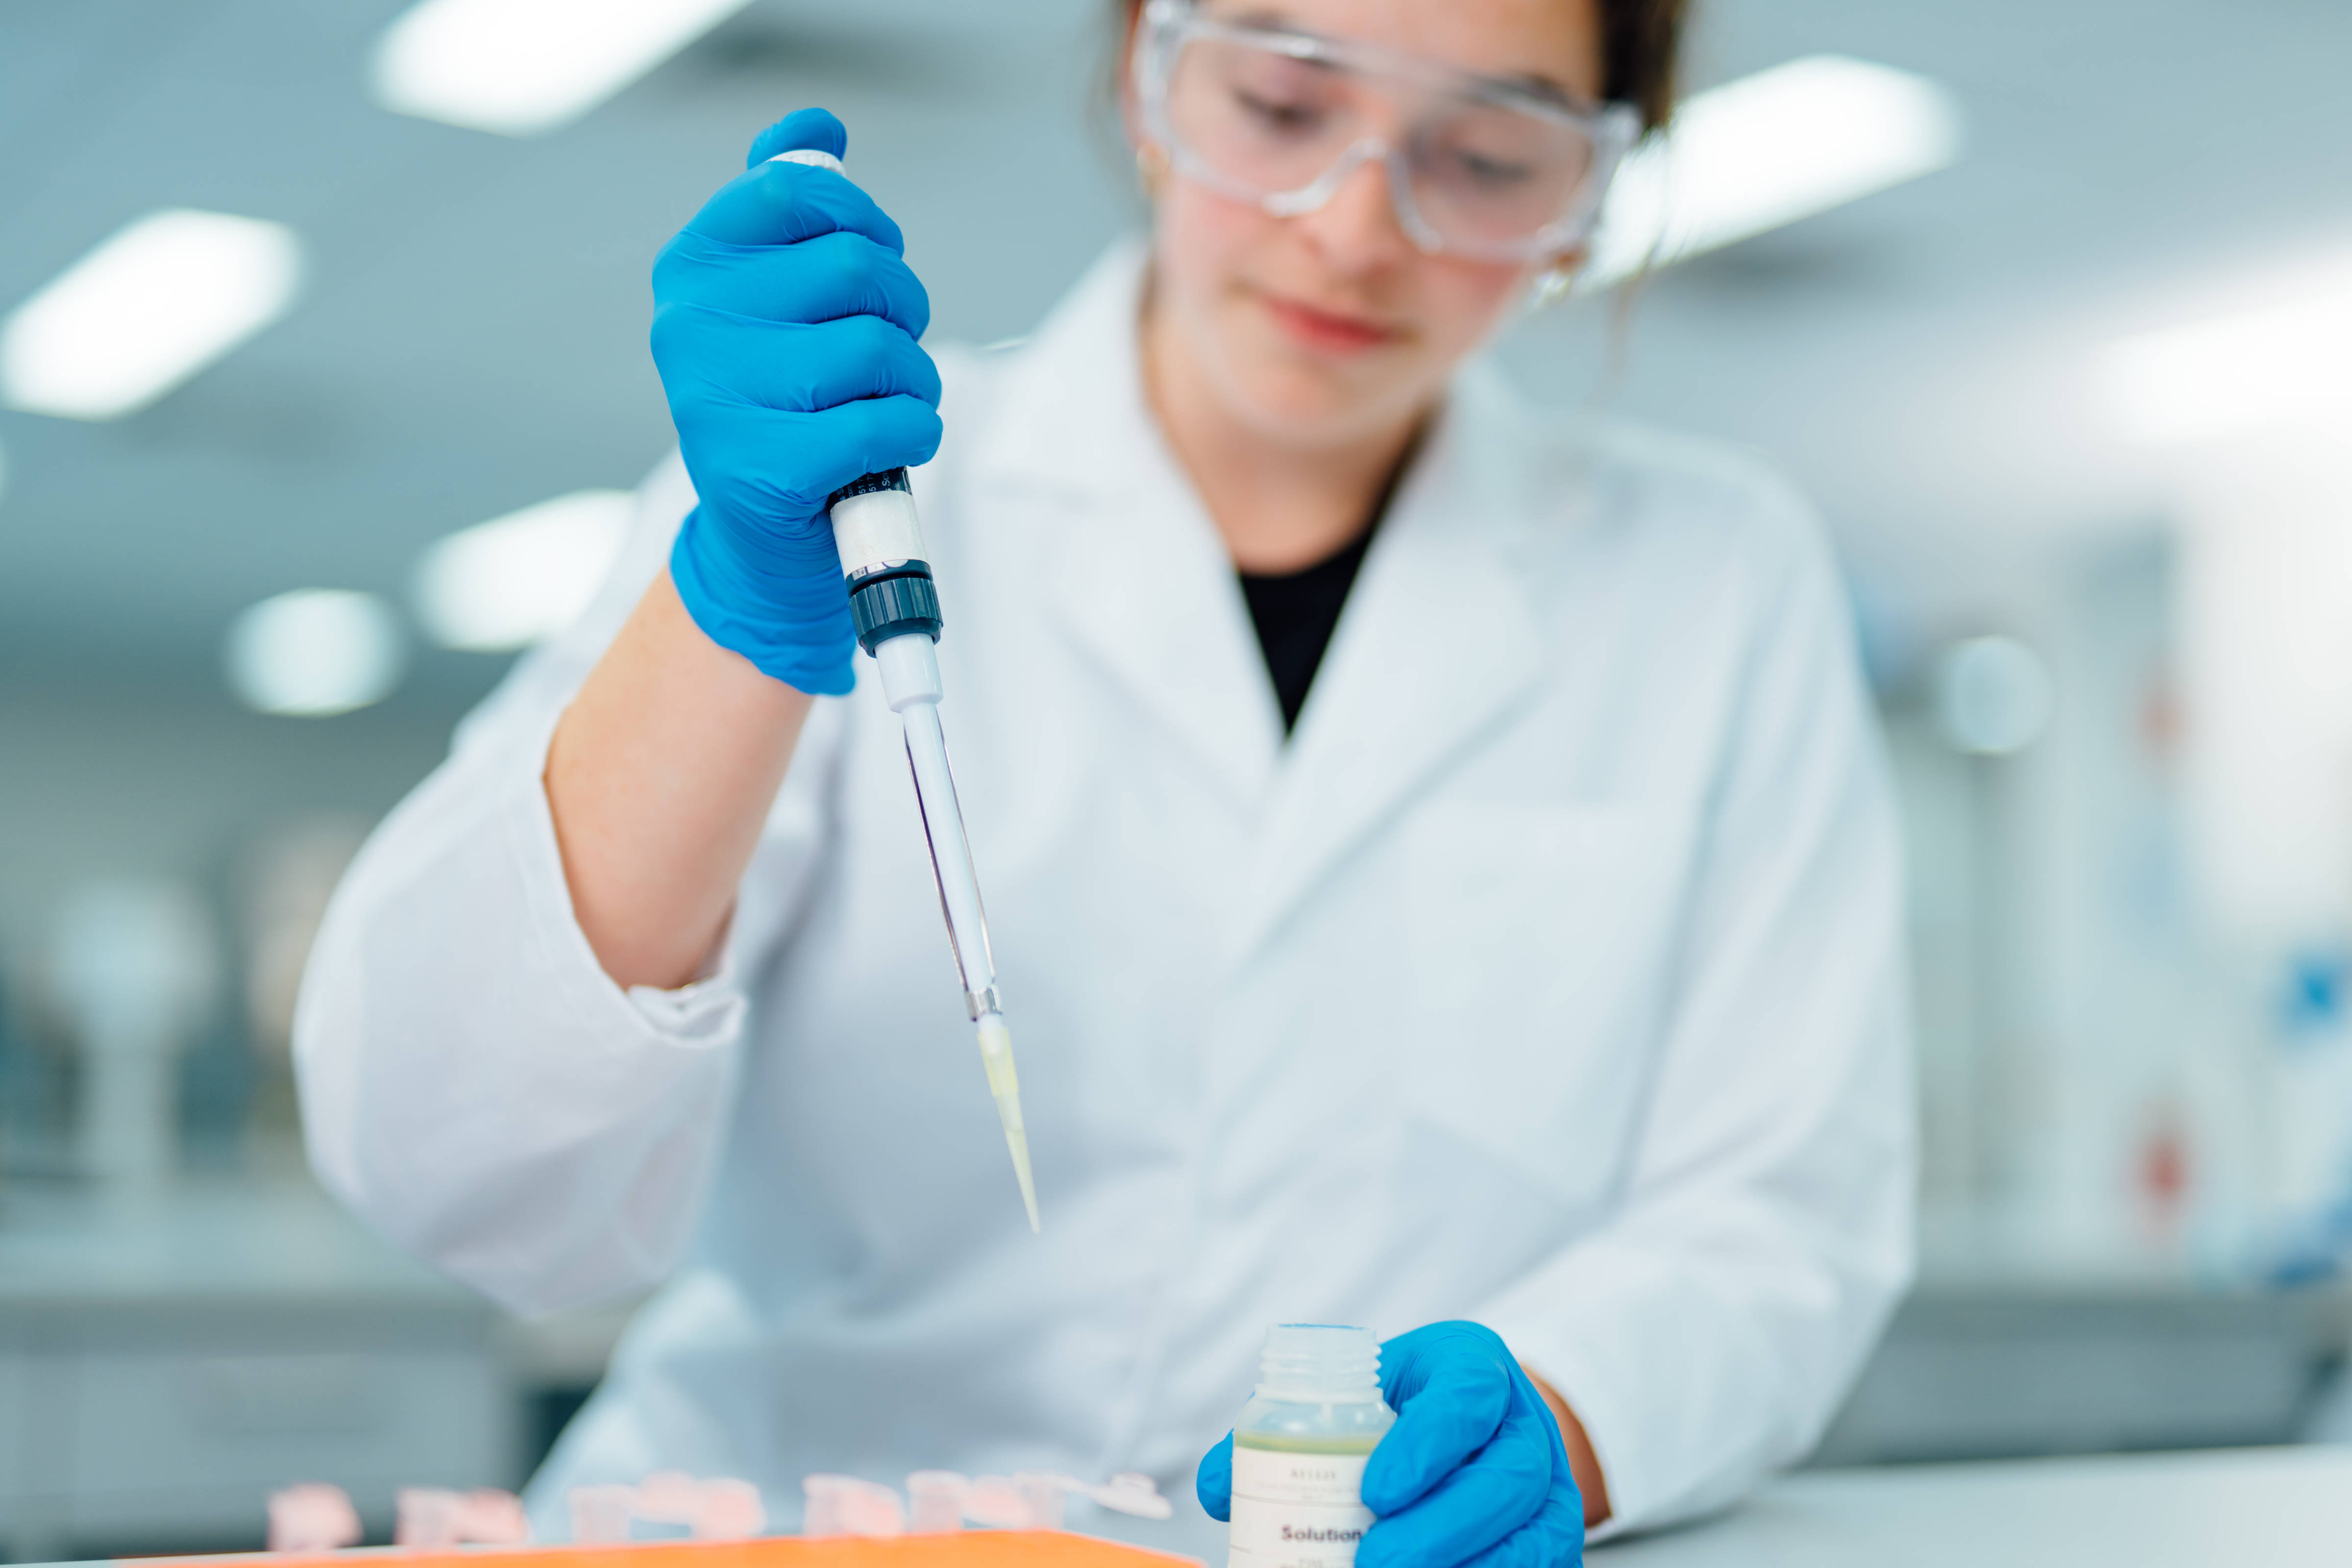 Young female scientist pipetting solution in a laboratory setting. Wearing eye protection, a white lab coat and blue gloves. Photo: University of Tasmania.